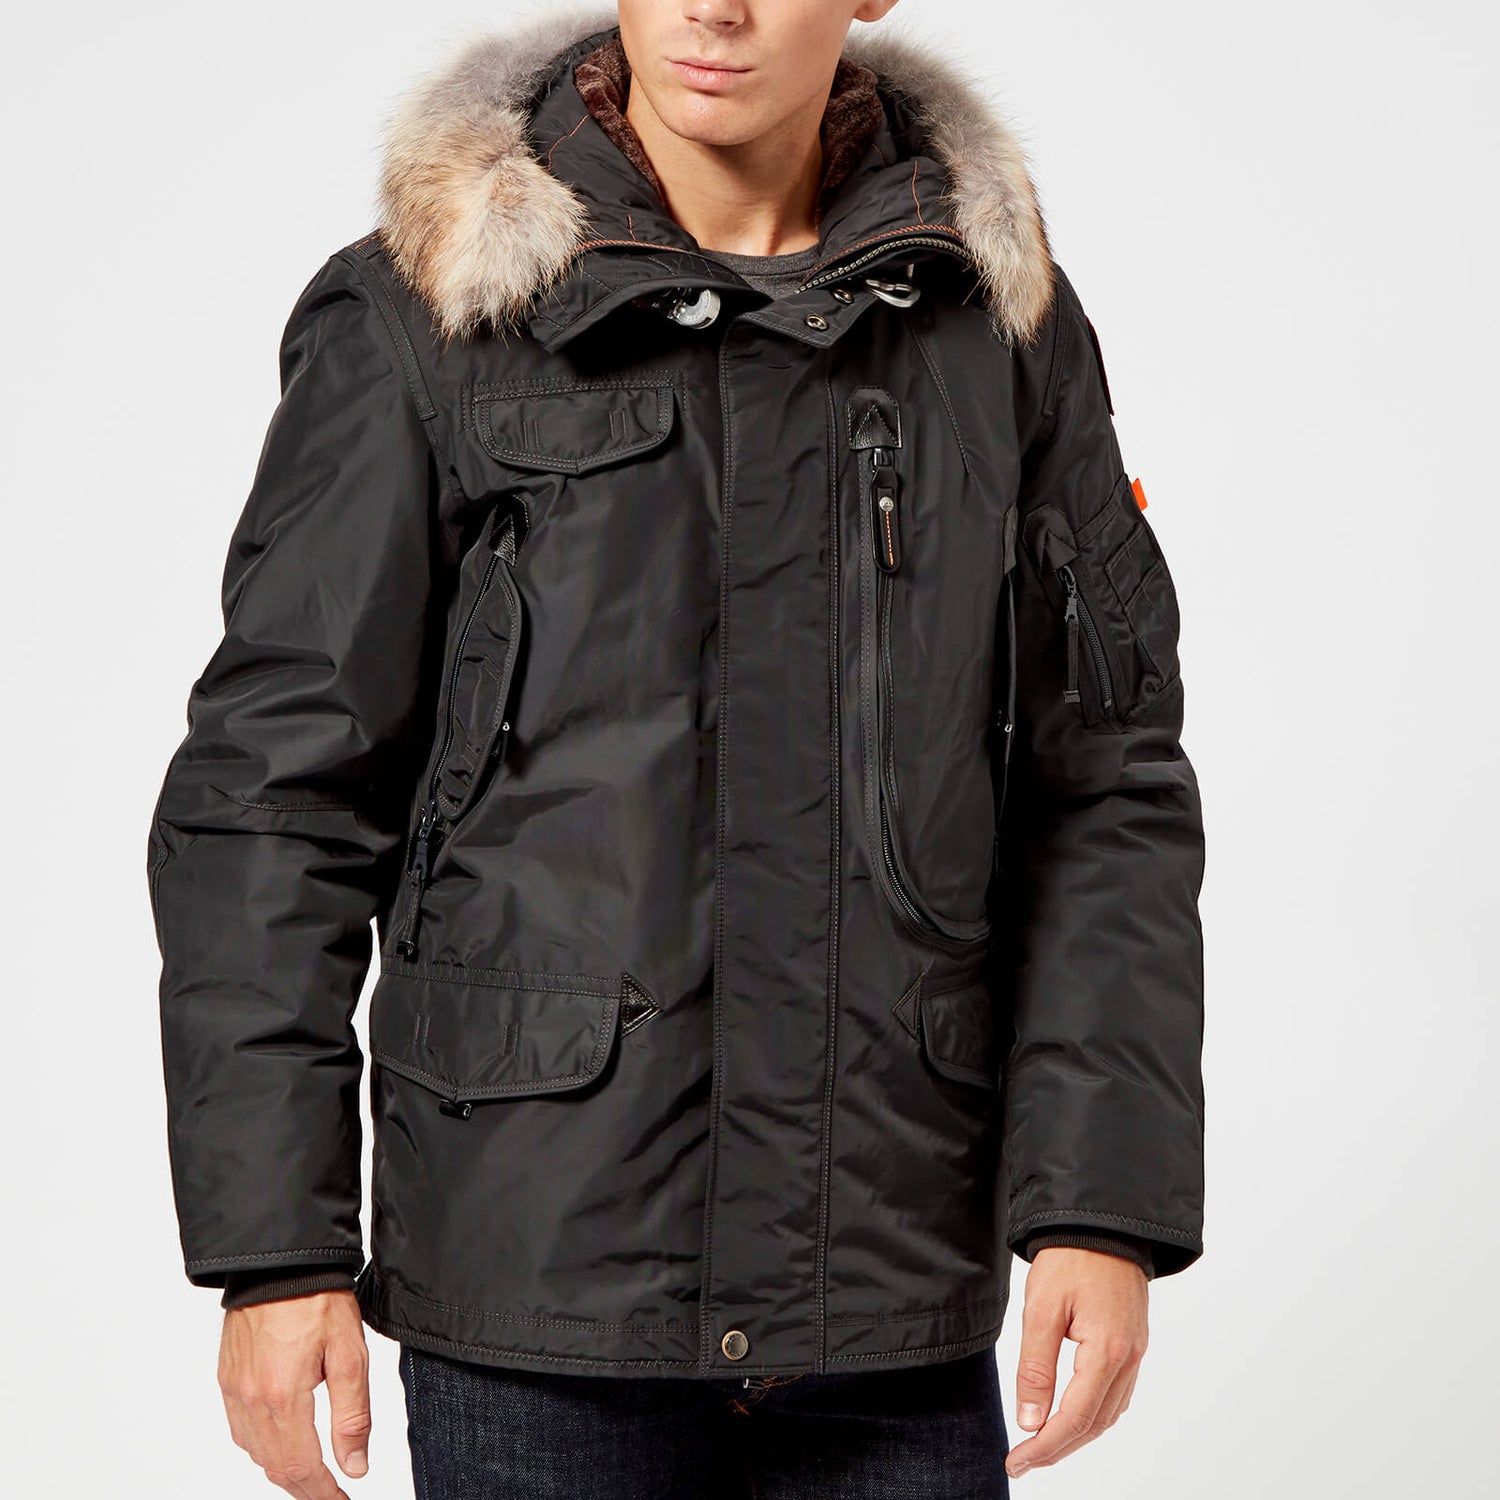 Parajumpers Men's Right Hand Jacket - Anthracite | TheHut.com